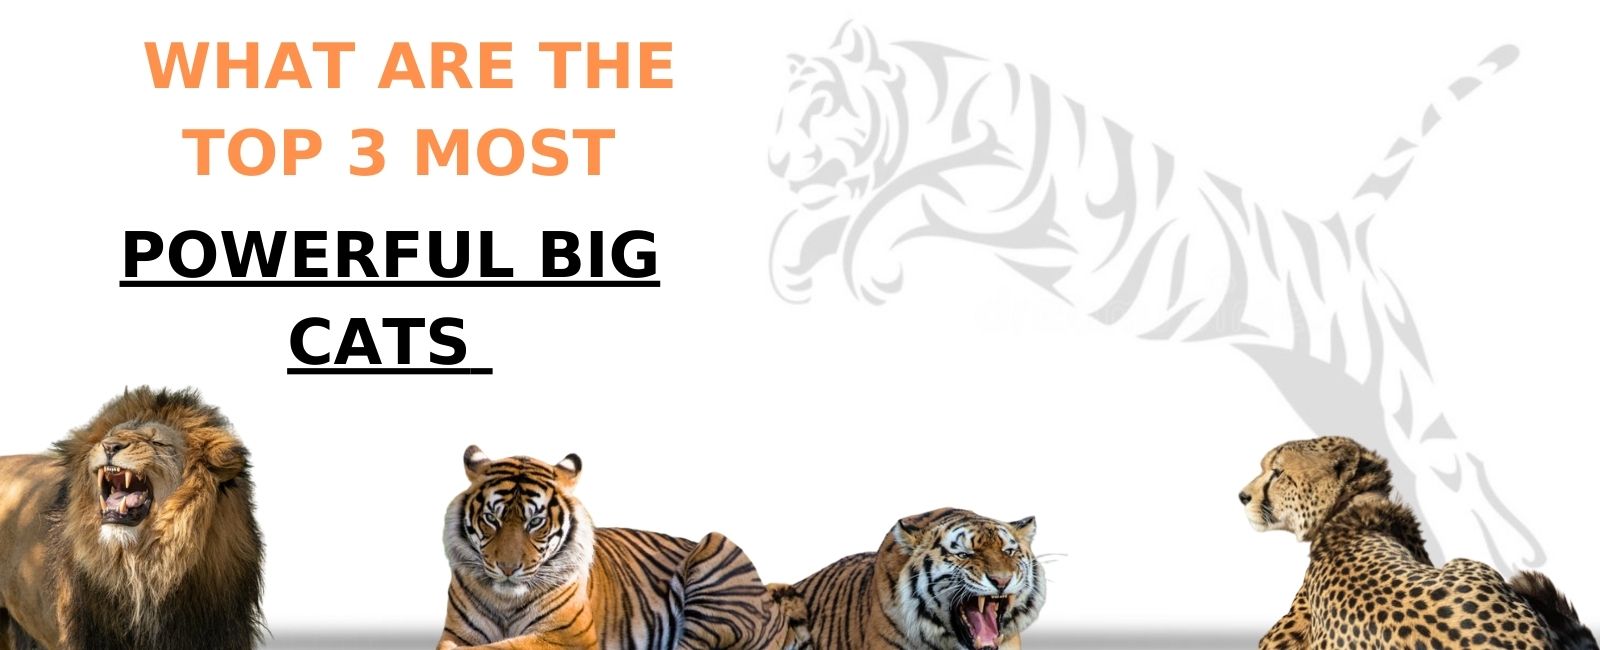 What are the top 3 most powerful big cats?